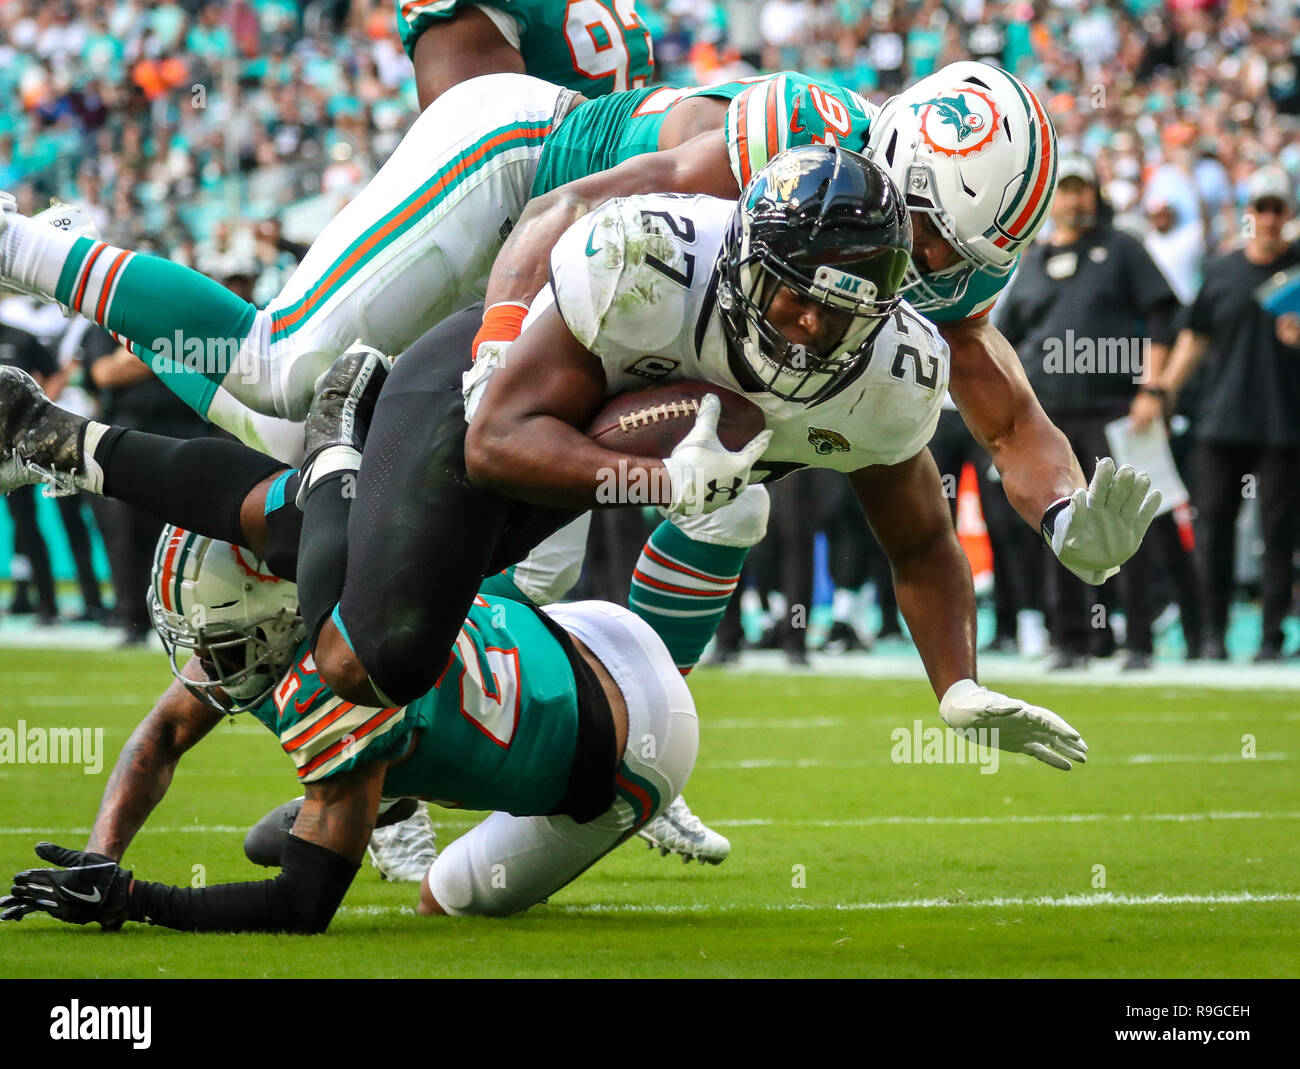 Miami Gardens, Florida, USA. 23rd Dec, 2018. Miami Dolphins defensive end Robert Quinn (94) tackles Jacksonville Jaguars running back Leonard Fournette (27) before reaching the end zone during an NFL game at the Hard Rock Stadium in Miami Gardens, Florida. The Jaguars won 17-7. Credit: Mario Houben/ZUMA Wire/Alamy Live News Stock Photo